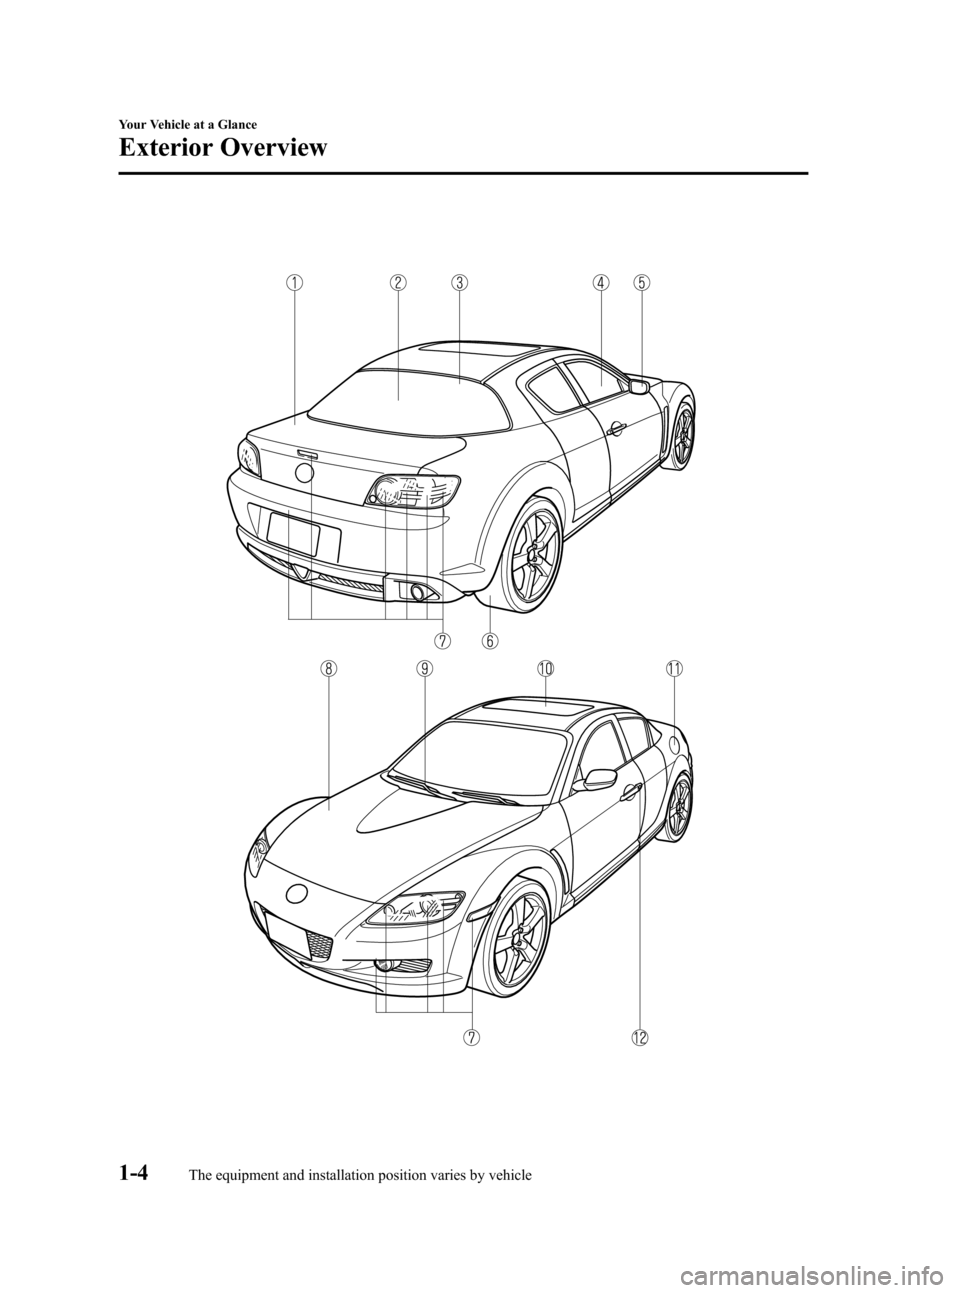 MAZDA MODEL RX 8 2008  Owners Manual (in English) Black plate (10,1)
1-4
Your Vehicle at a Glance
The equipment and installation position varies by vehicle
Exterior Overview
RX-8_8X44-EA-07G_Edition1 Page10
Friday, May 11 2007 5:2 PM
Form No.8X44-EA-